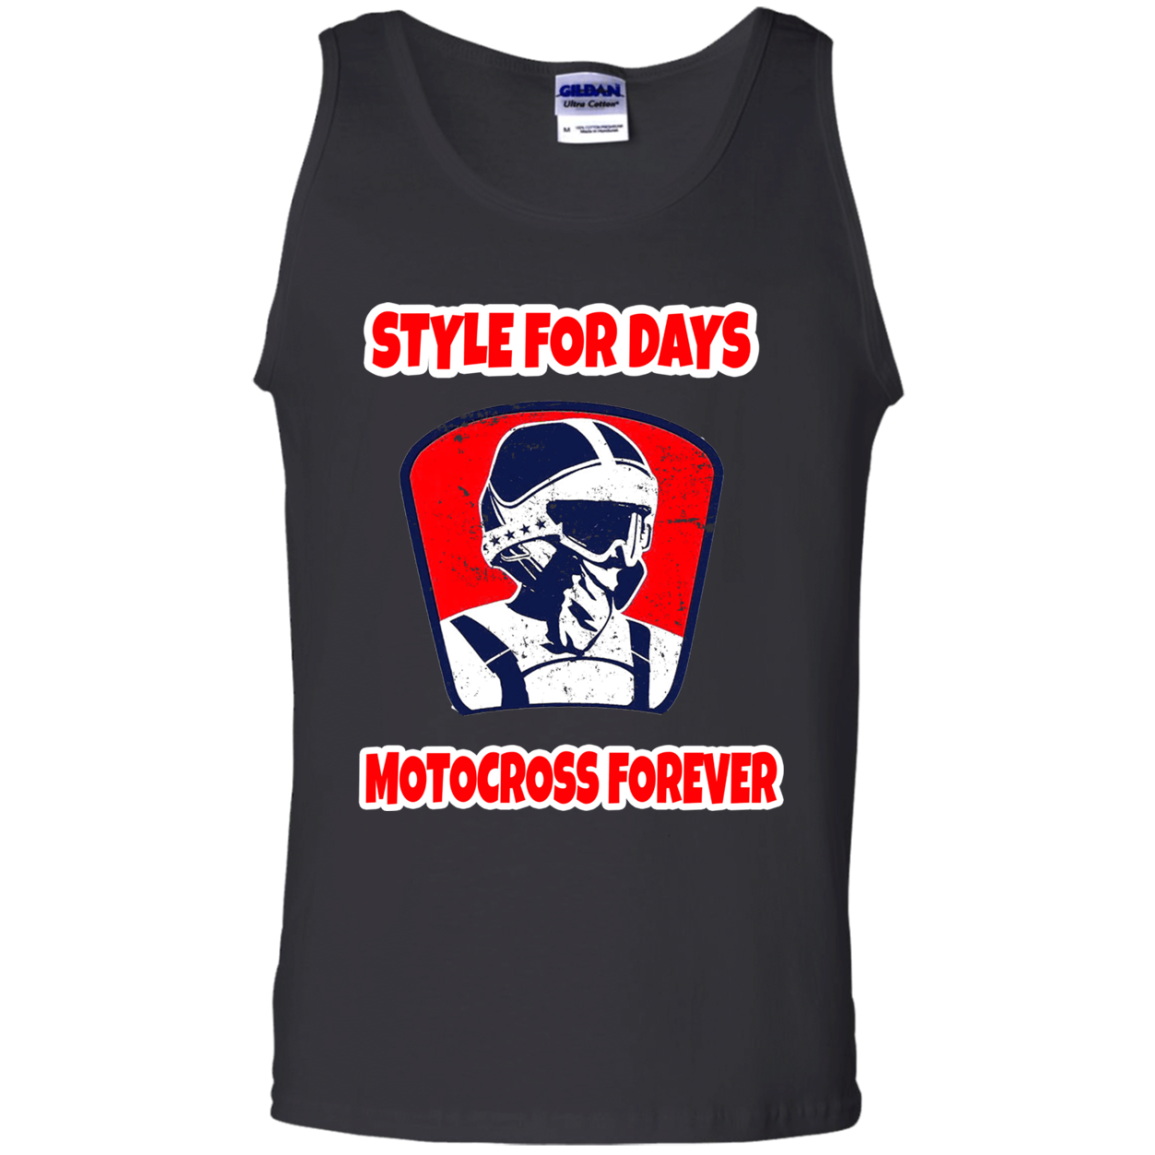 Style For Days Motocross Forever Dirt Bike Tank Top Shirts